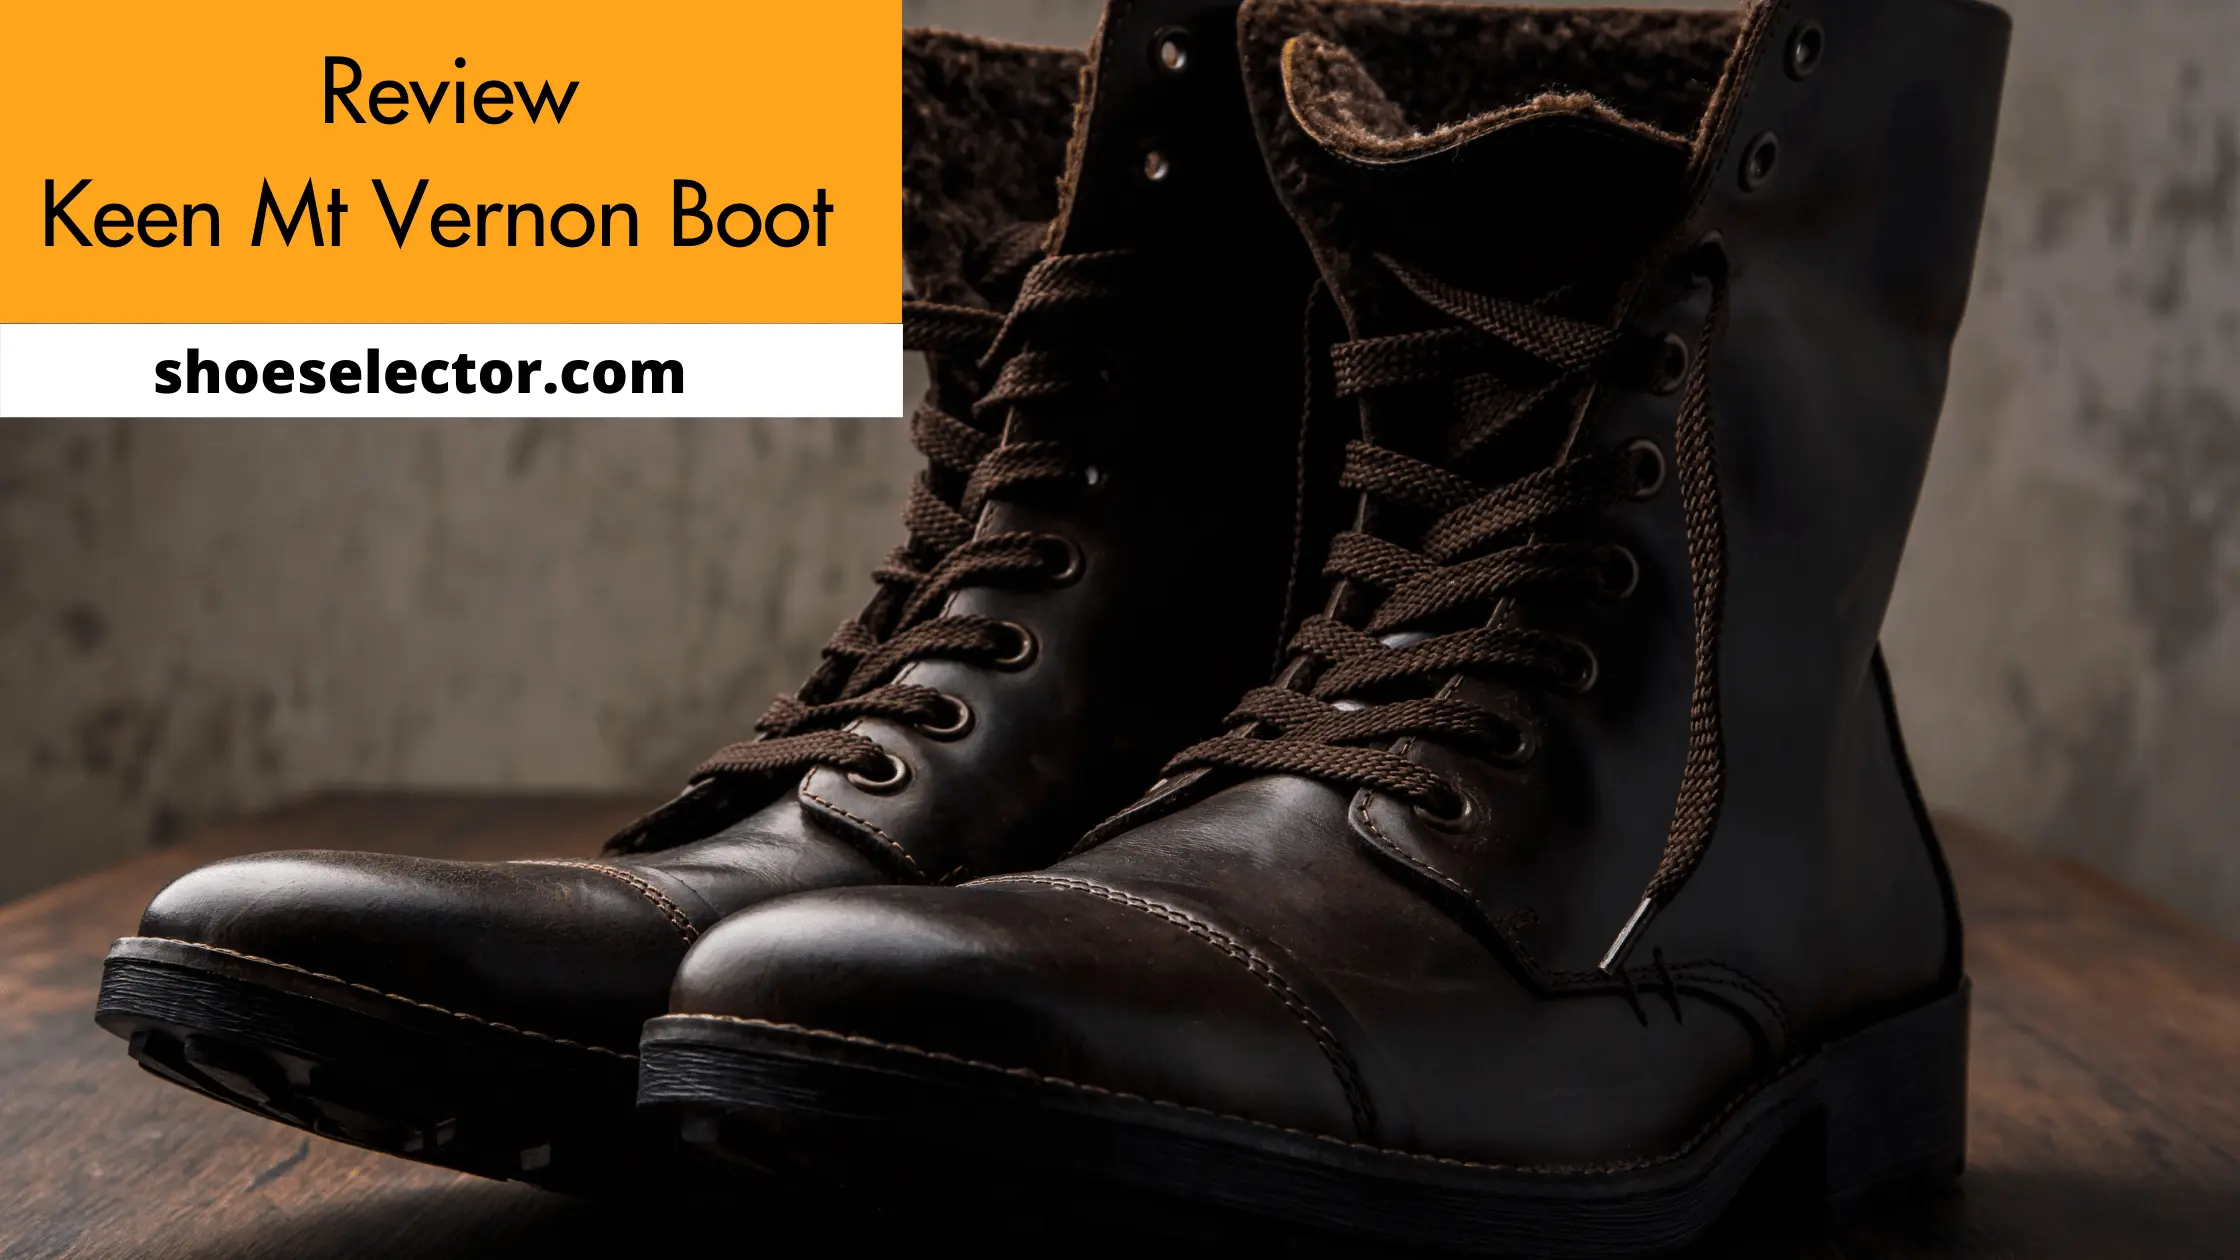 Keen mt Vernon Boot Review - Recommended Guide